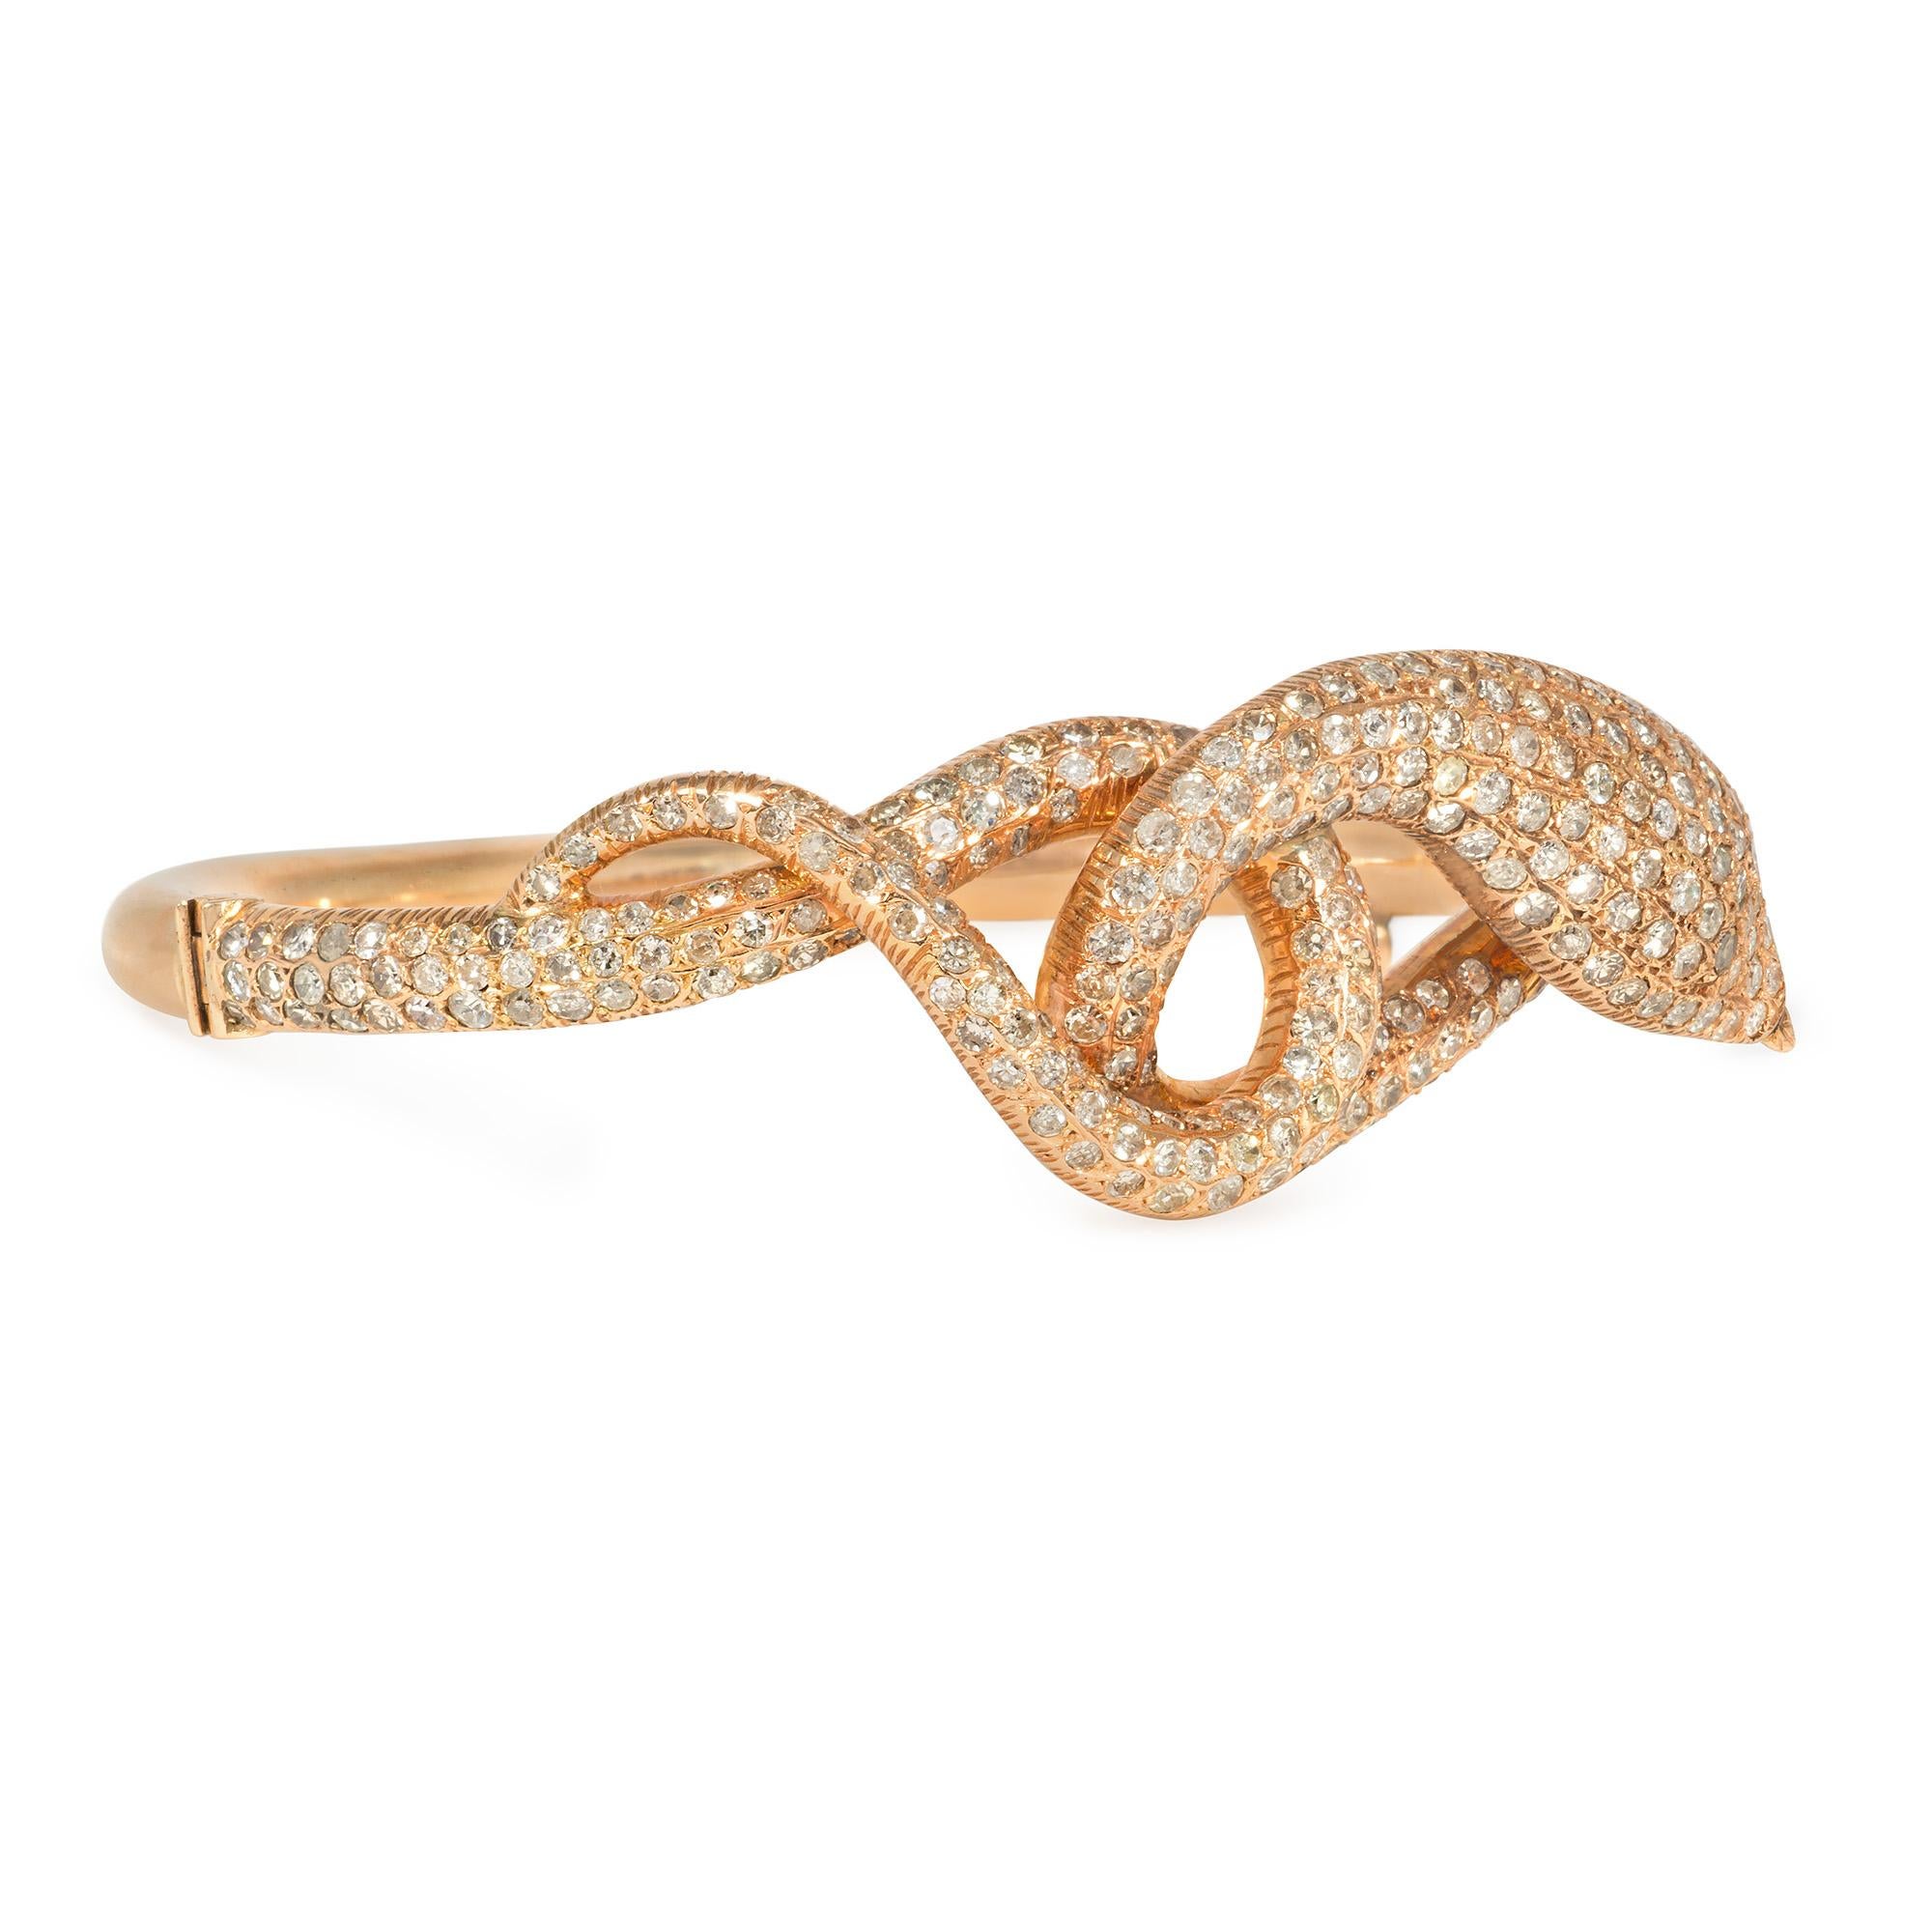 A Mid-Century rose gold and pavé diamond hinged bangle bracelet in the form of a coiled snake, set with single-cut diamonds on the front, in 14k.  Atw diamonds 4.00 cts.  Dimensions: 6.5